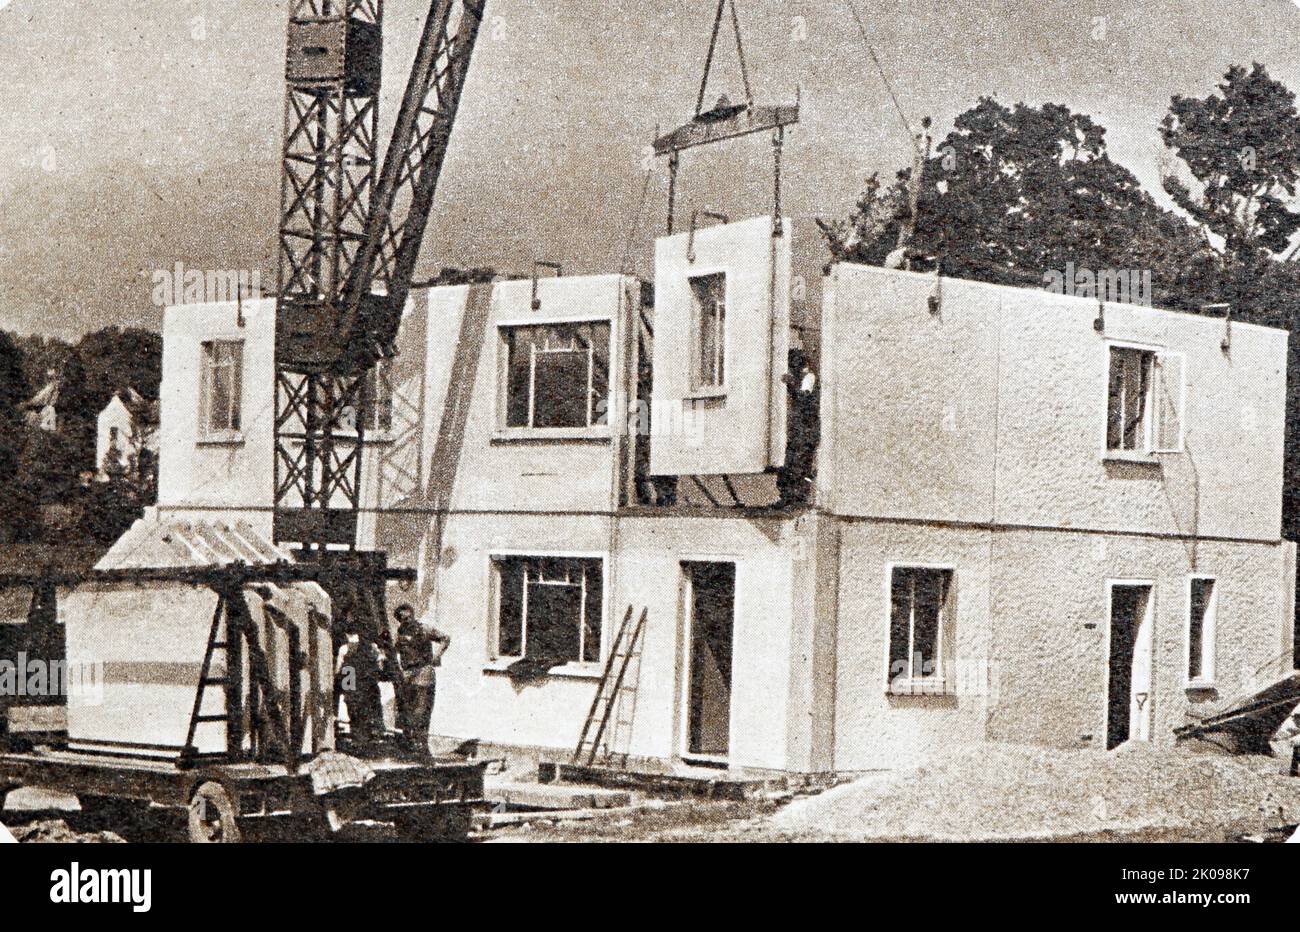 Concrete units being erected for new semi-detached concrete pre-fabricated houses. Prefabs (prefabricated homes) were a major part of the delivery plan to address the United Kingdom's post-Second World War housing shortage. They were envisaged by war-time prime minister Winston Churchill in March 1944, and legally outlined in the Housing (Temporary Accommodation) Act 1944. Stock Photo